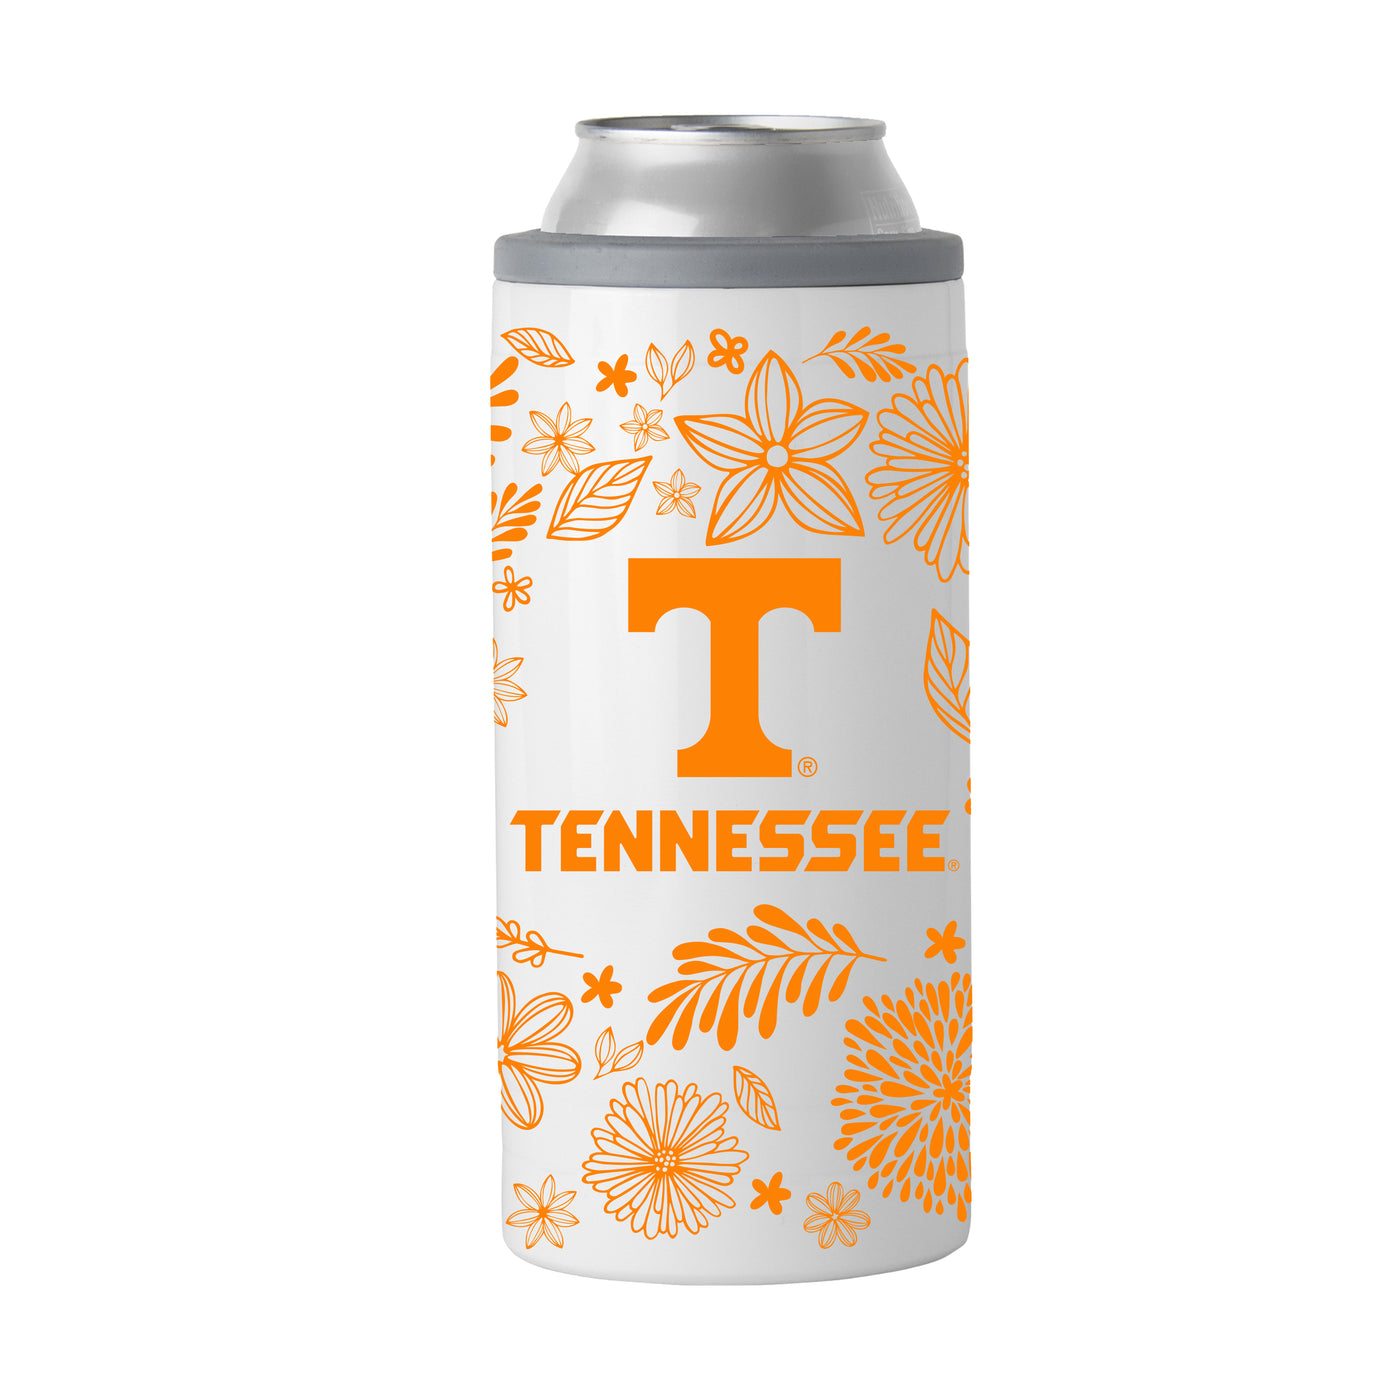 Tennessee 12oz Botanical Slim Can Coolie